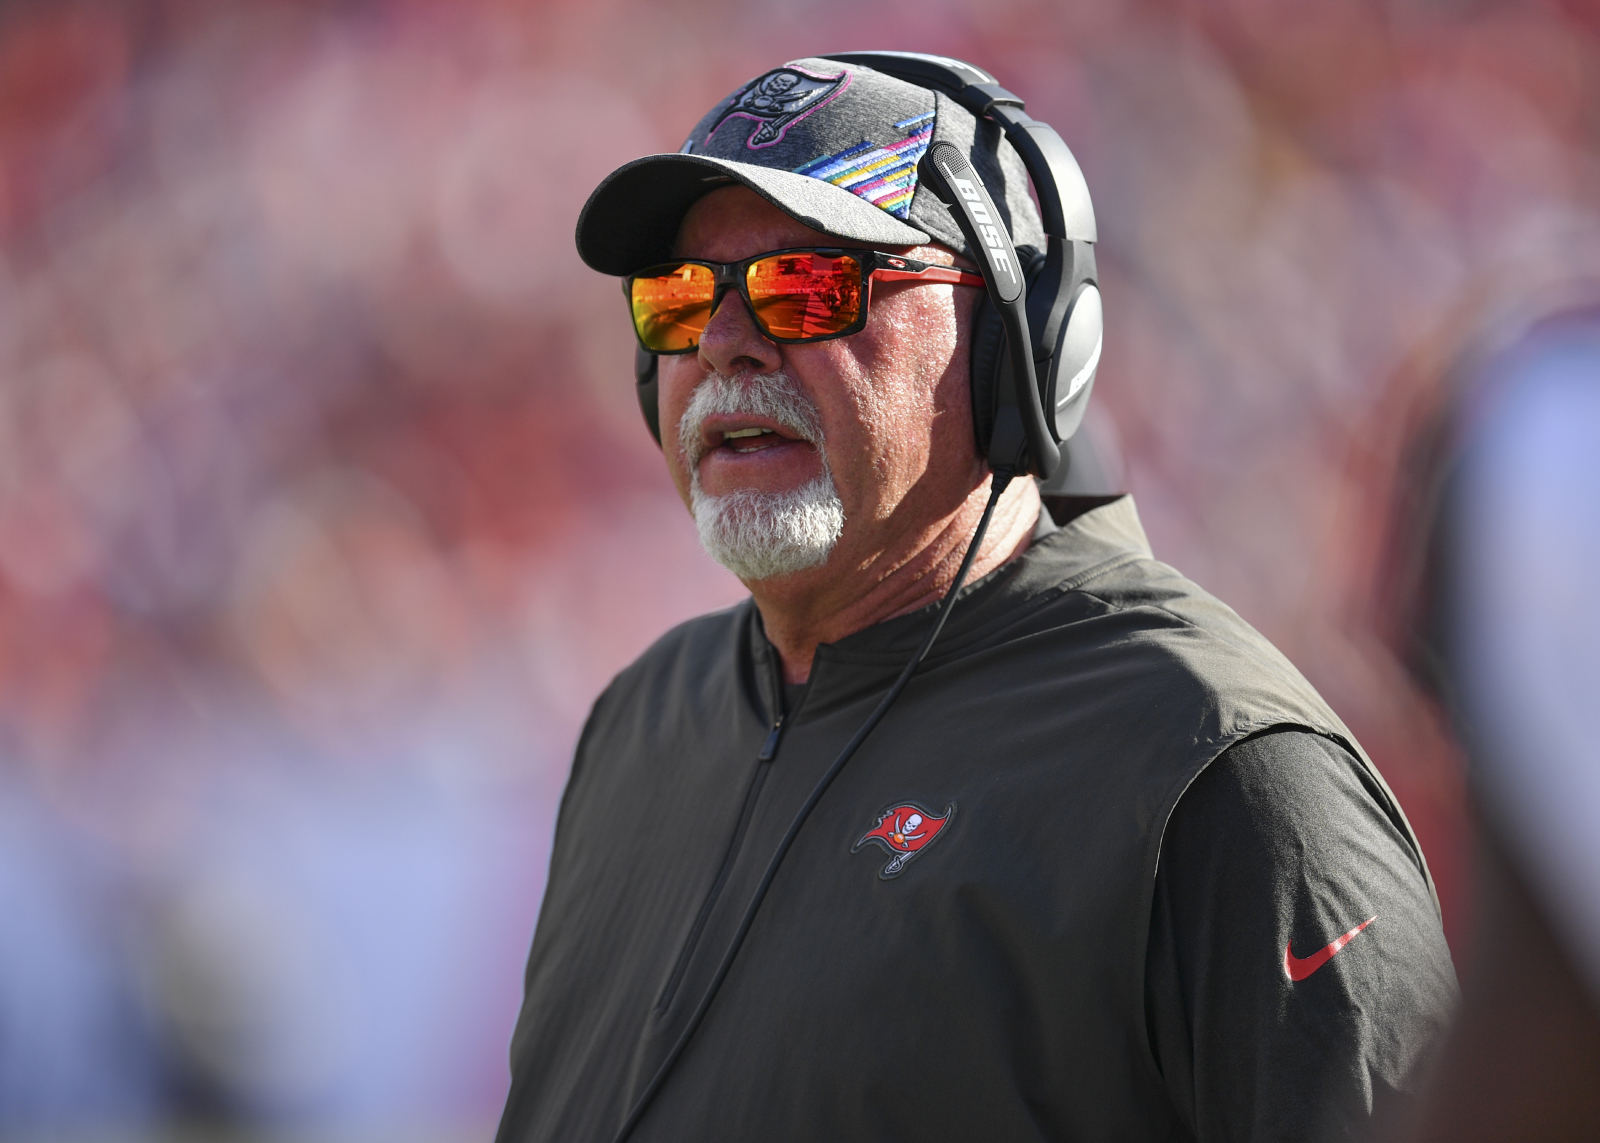 Bruce Arians and the Buccaneers have a huge game in Week 9. Ahead of the game, Arians sent out a strong message about Saints RB Alvin Kamara.